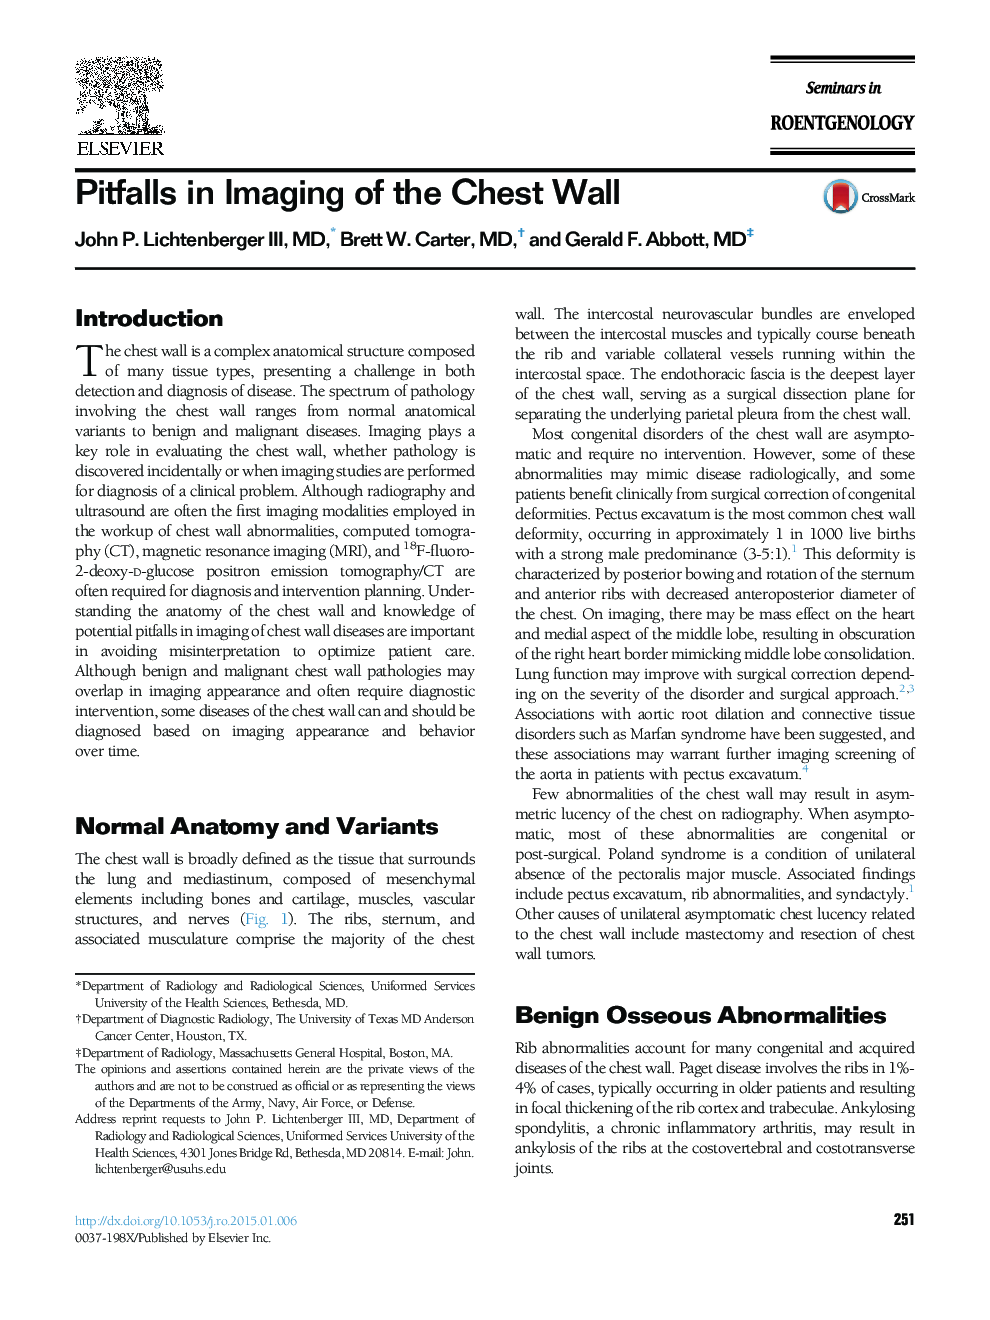 Pitfalls in Imaging of the Chest Wall